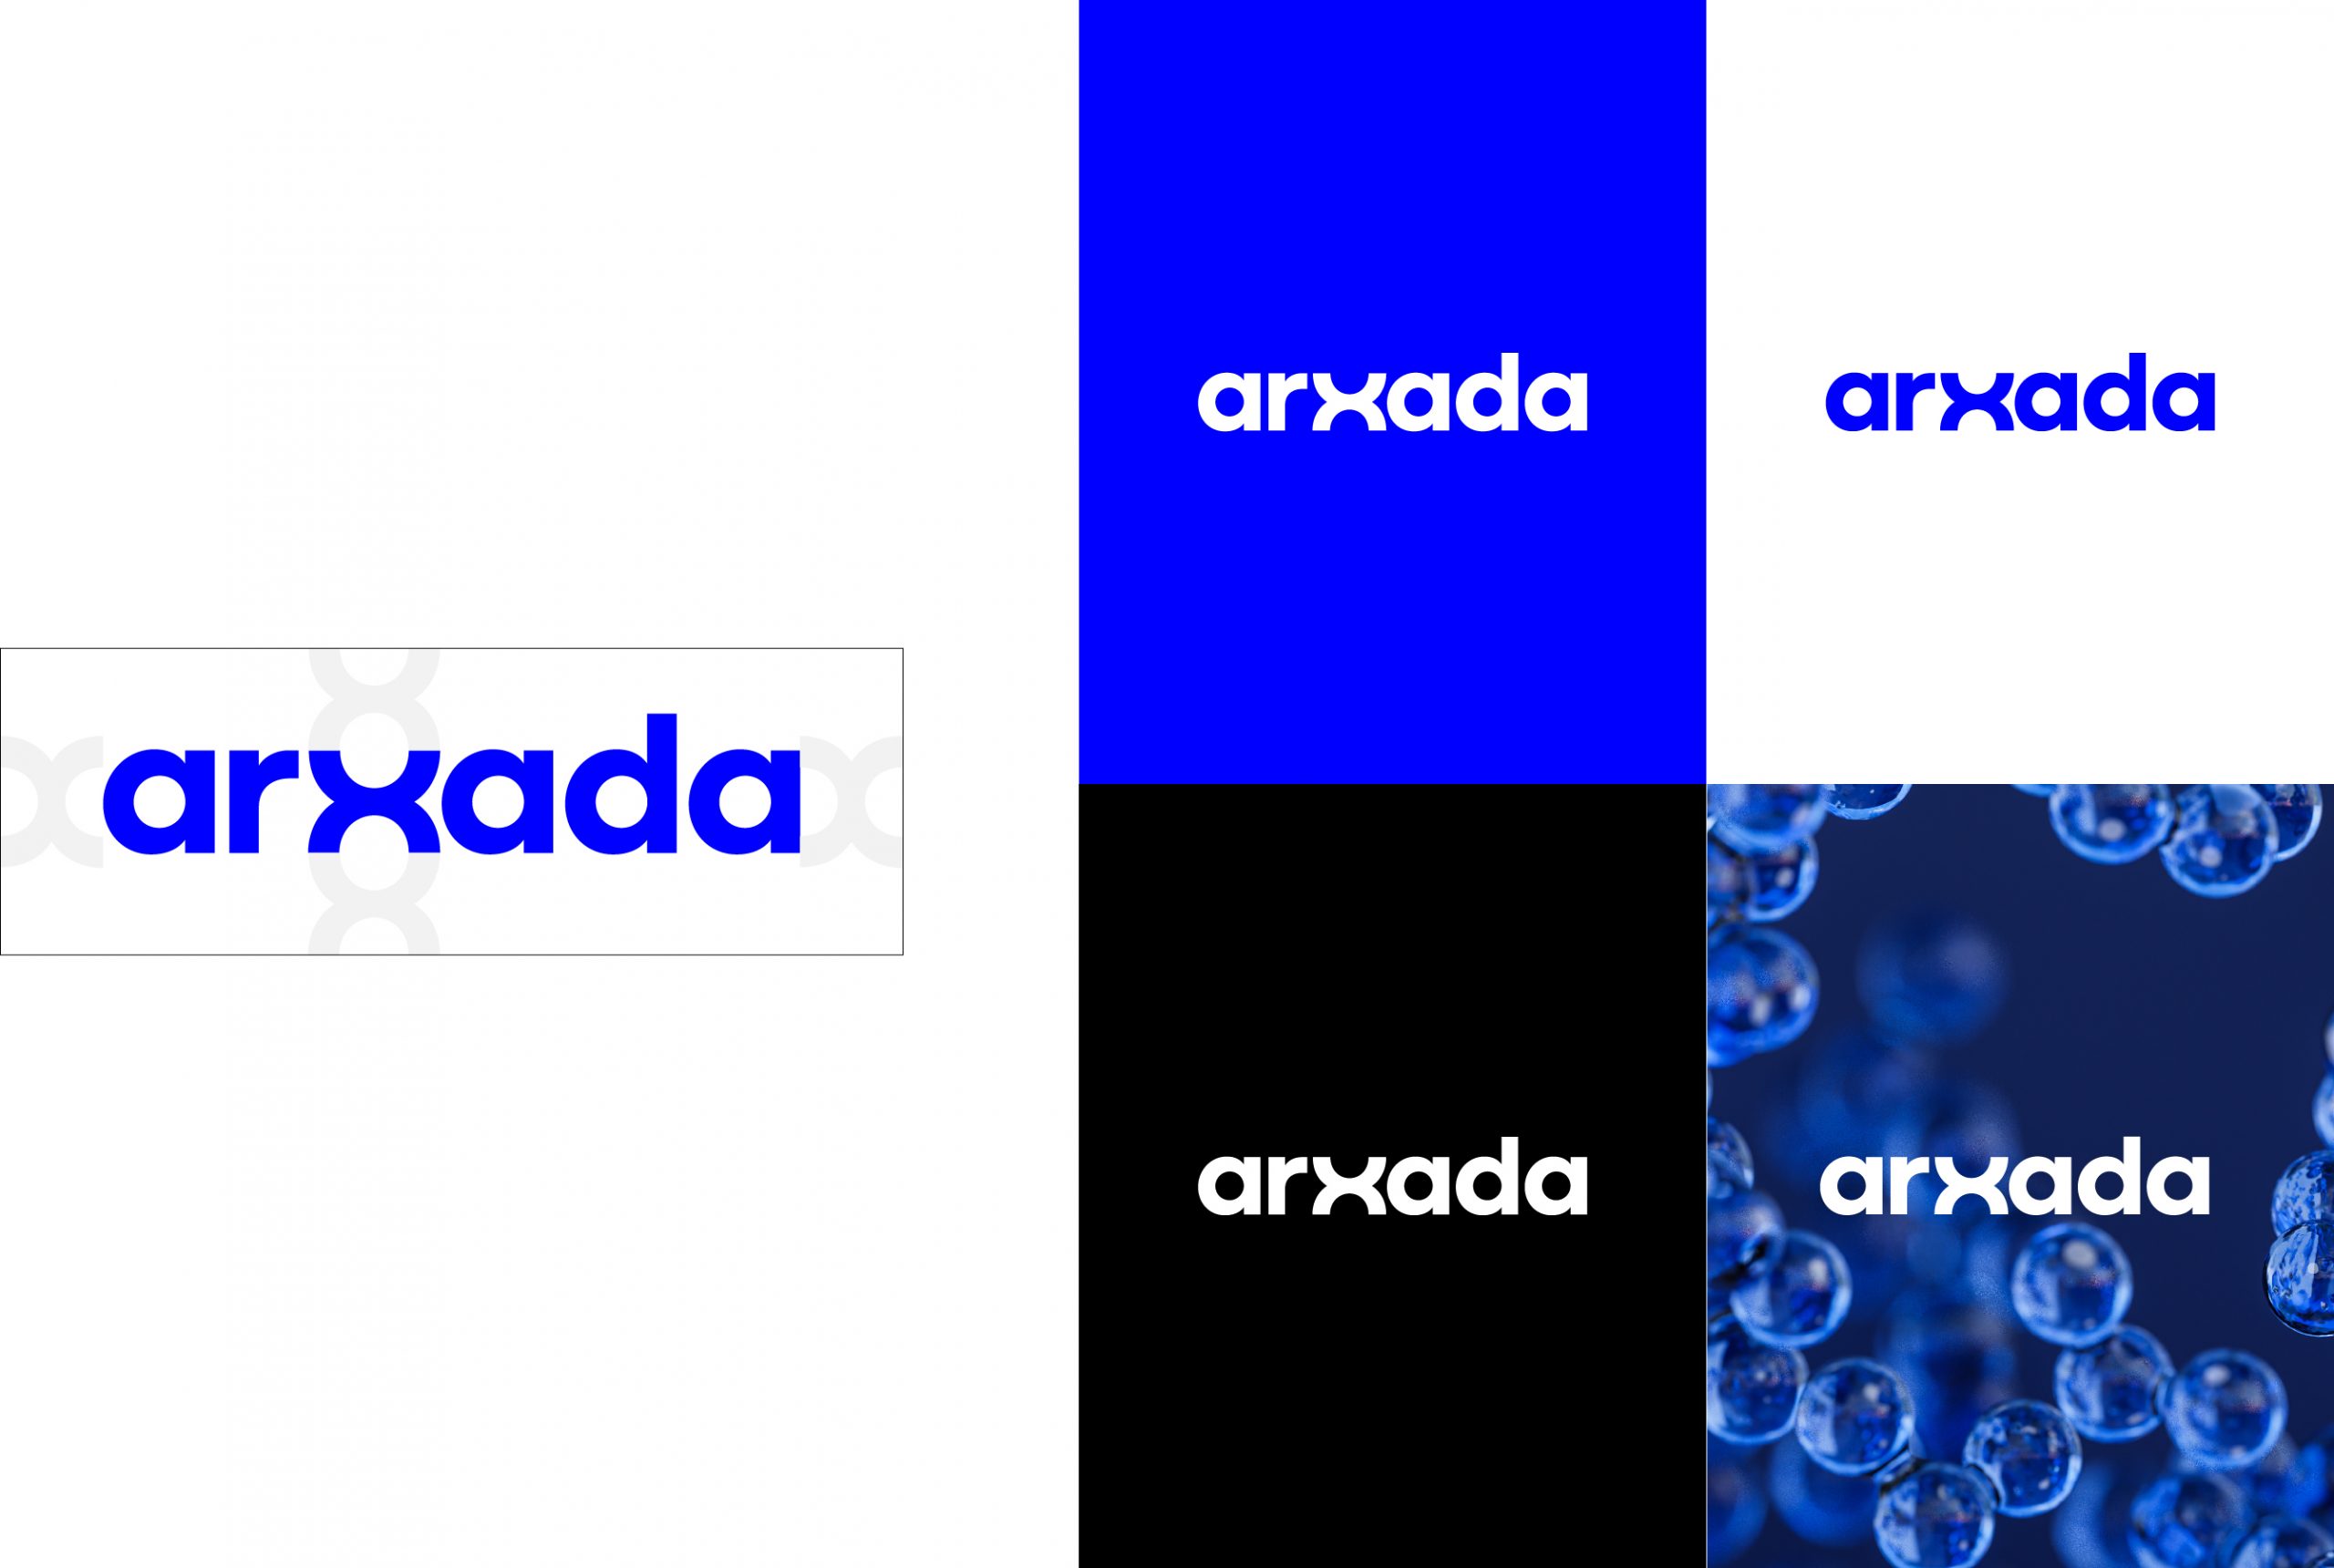 Examples of how the Arxada logo is to be used.